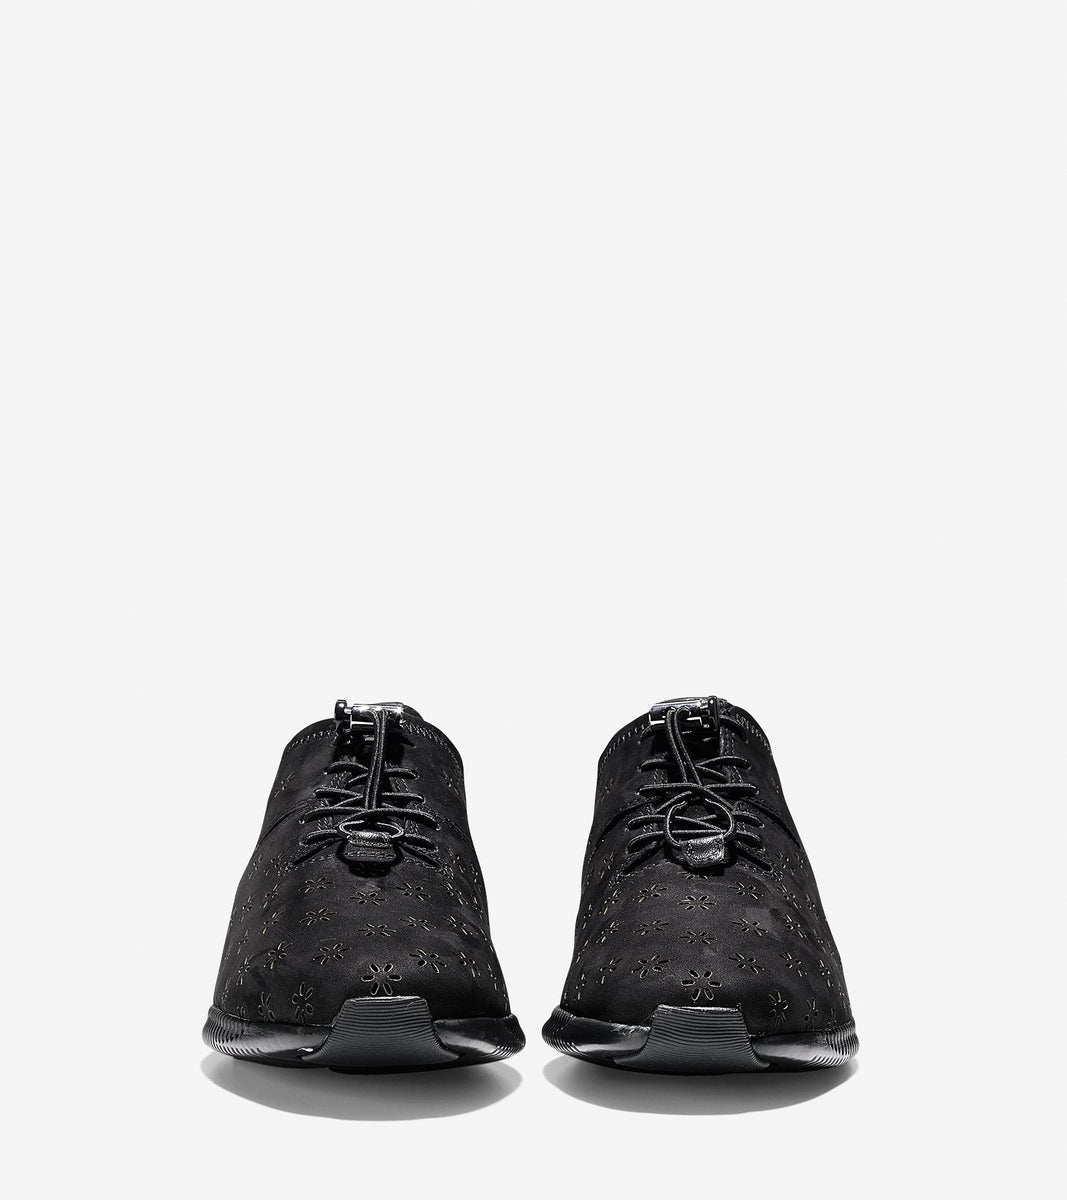 ColeHaan-StudiøGrand Pack-and-Go Sneaker-w10574-Black Perforated-black